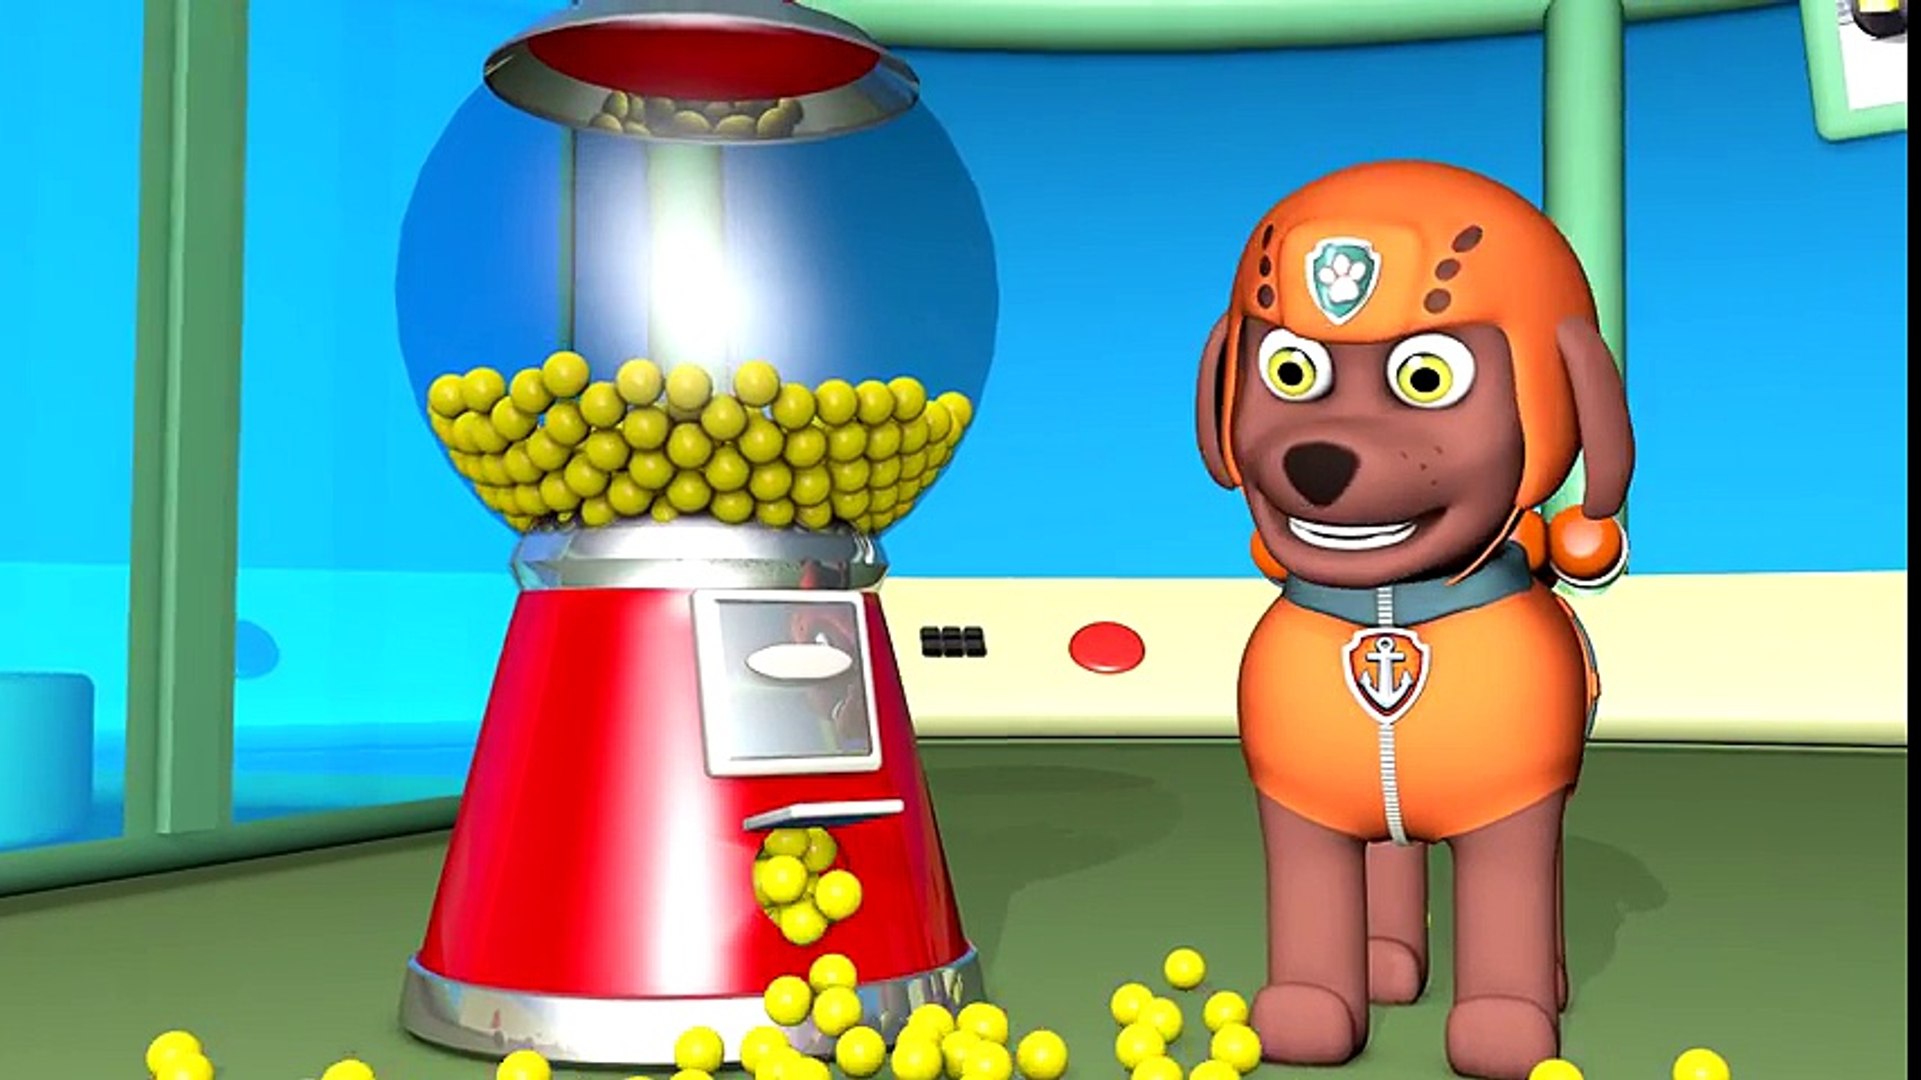 PAW PATROL learning colors catoon with ZUMA and gumball machine  | Children Learning Video